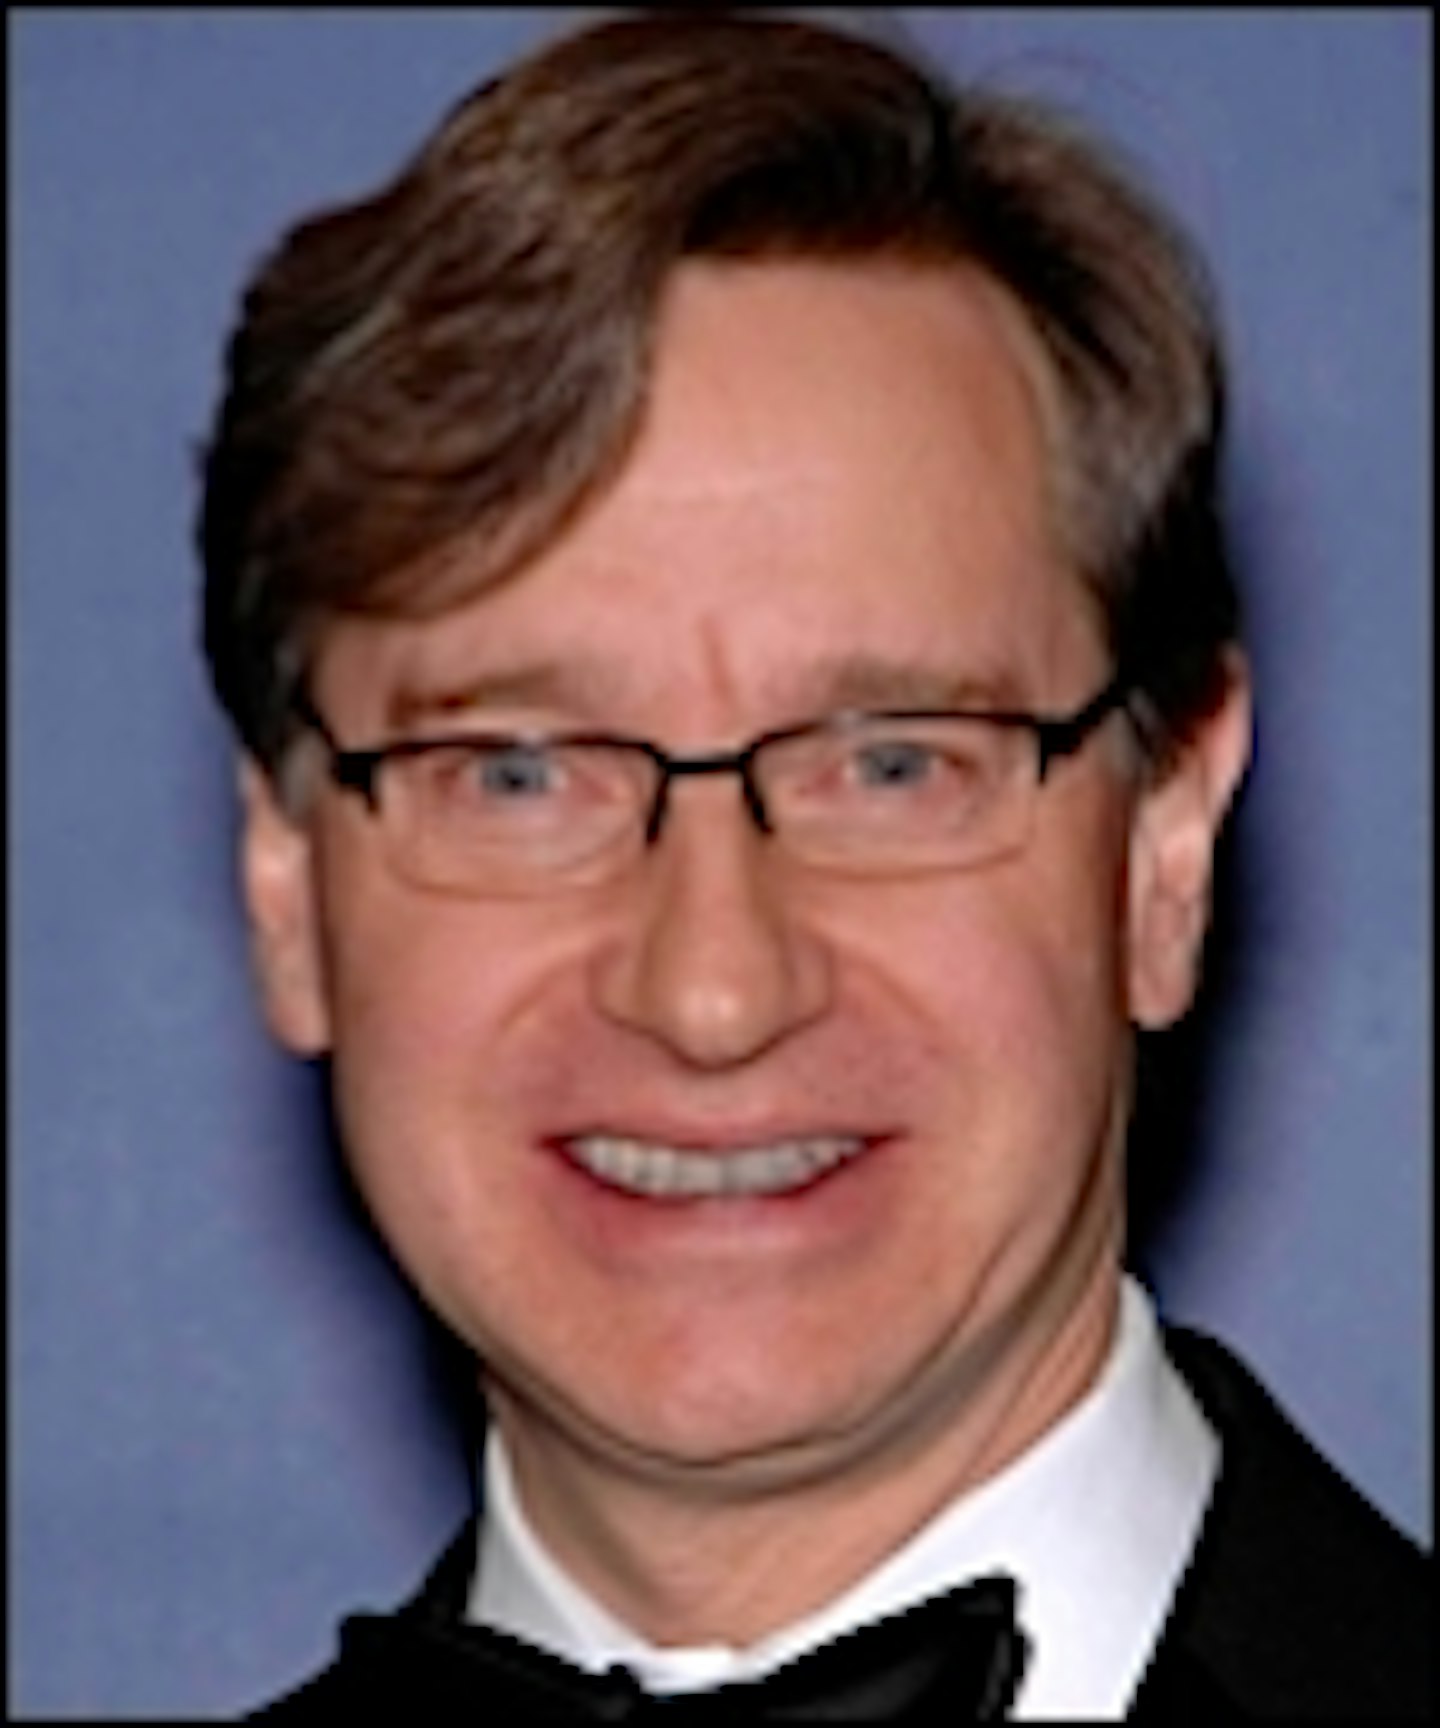 Paul Feig Eyed For Ghostbusters 3